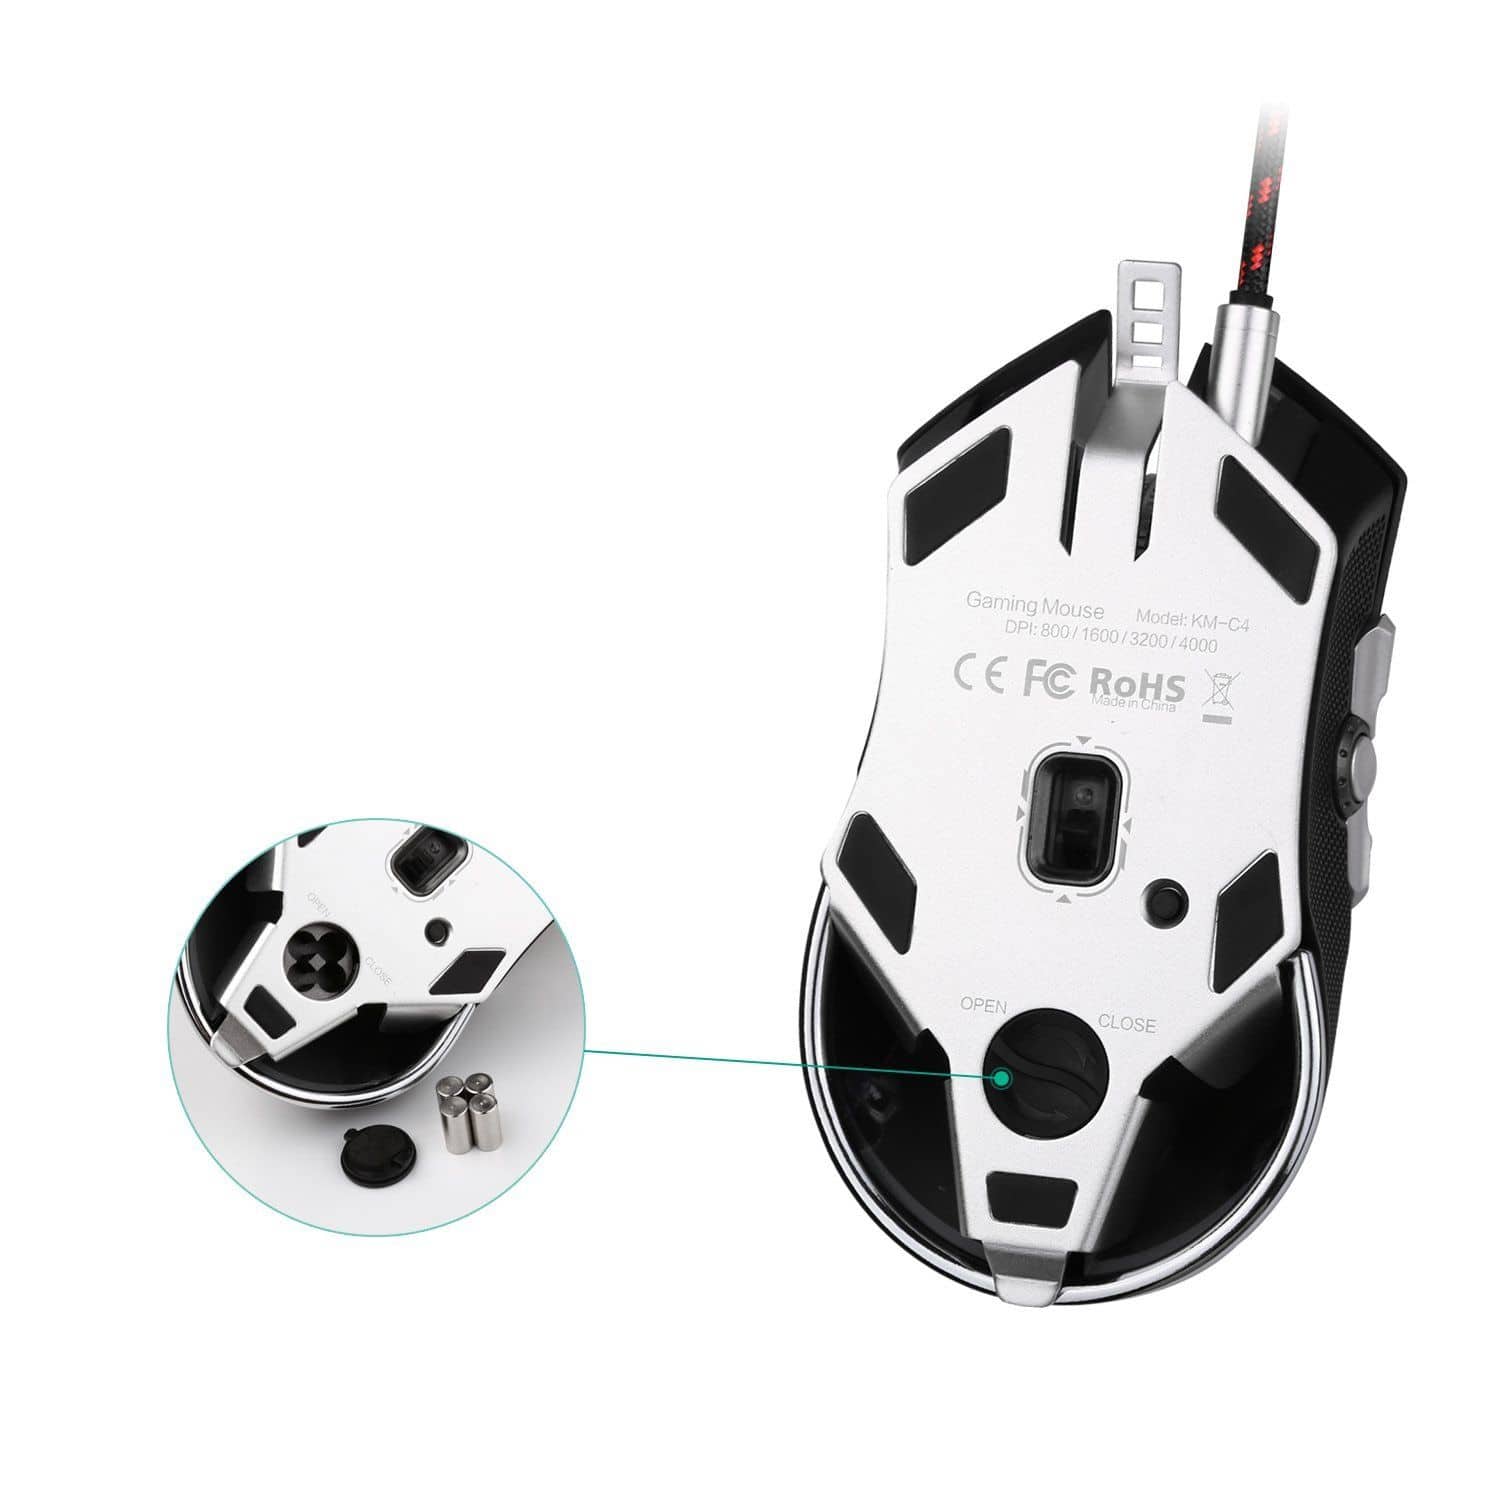 KM-C4 RGB Gaming Mouse With Switches 8 Programmable Buttons